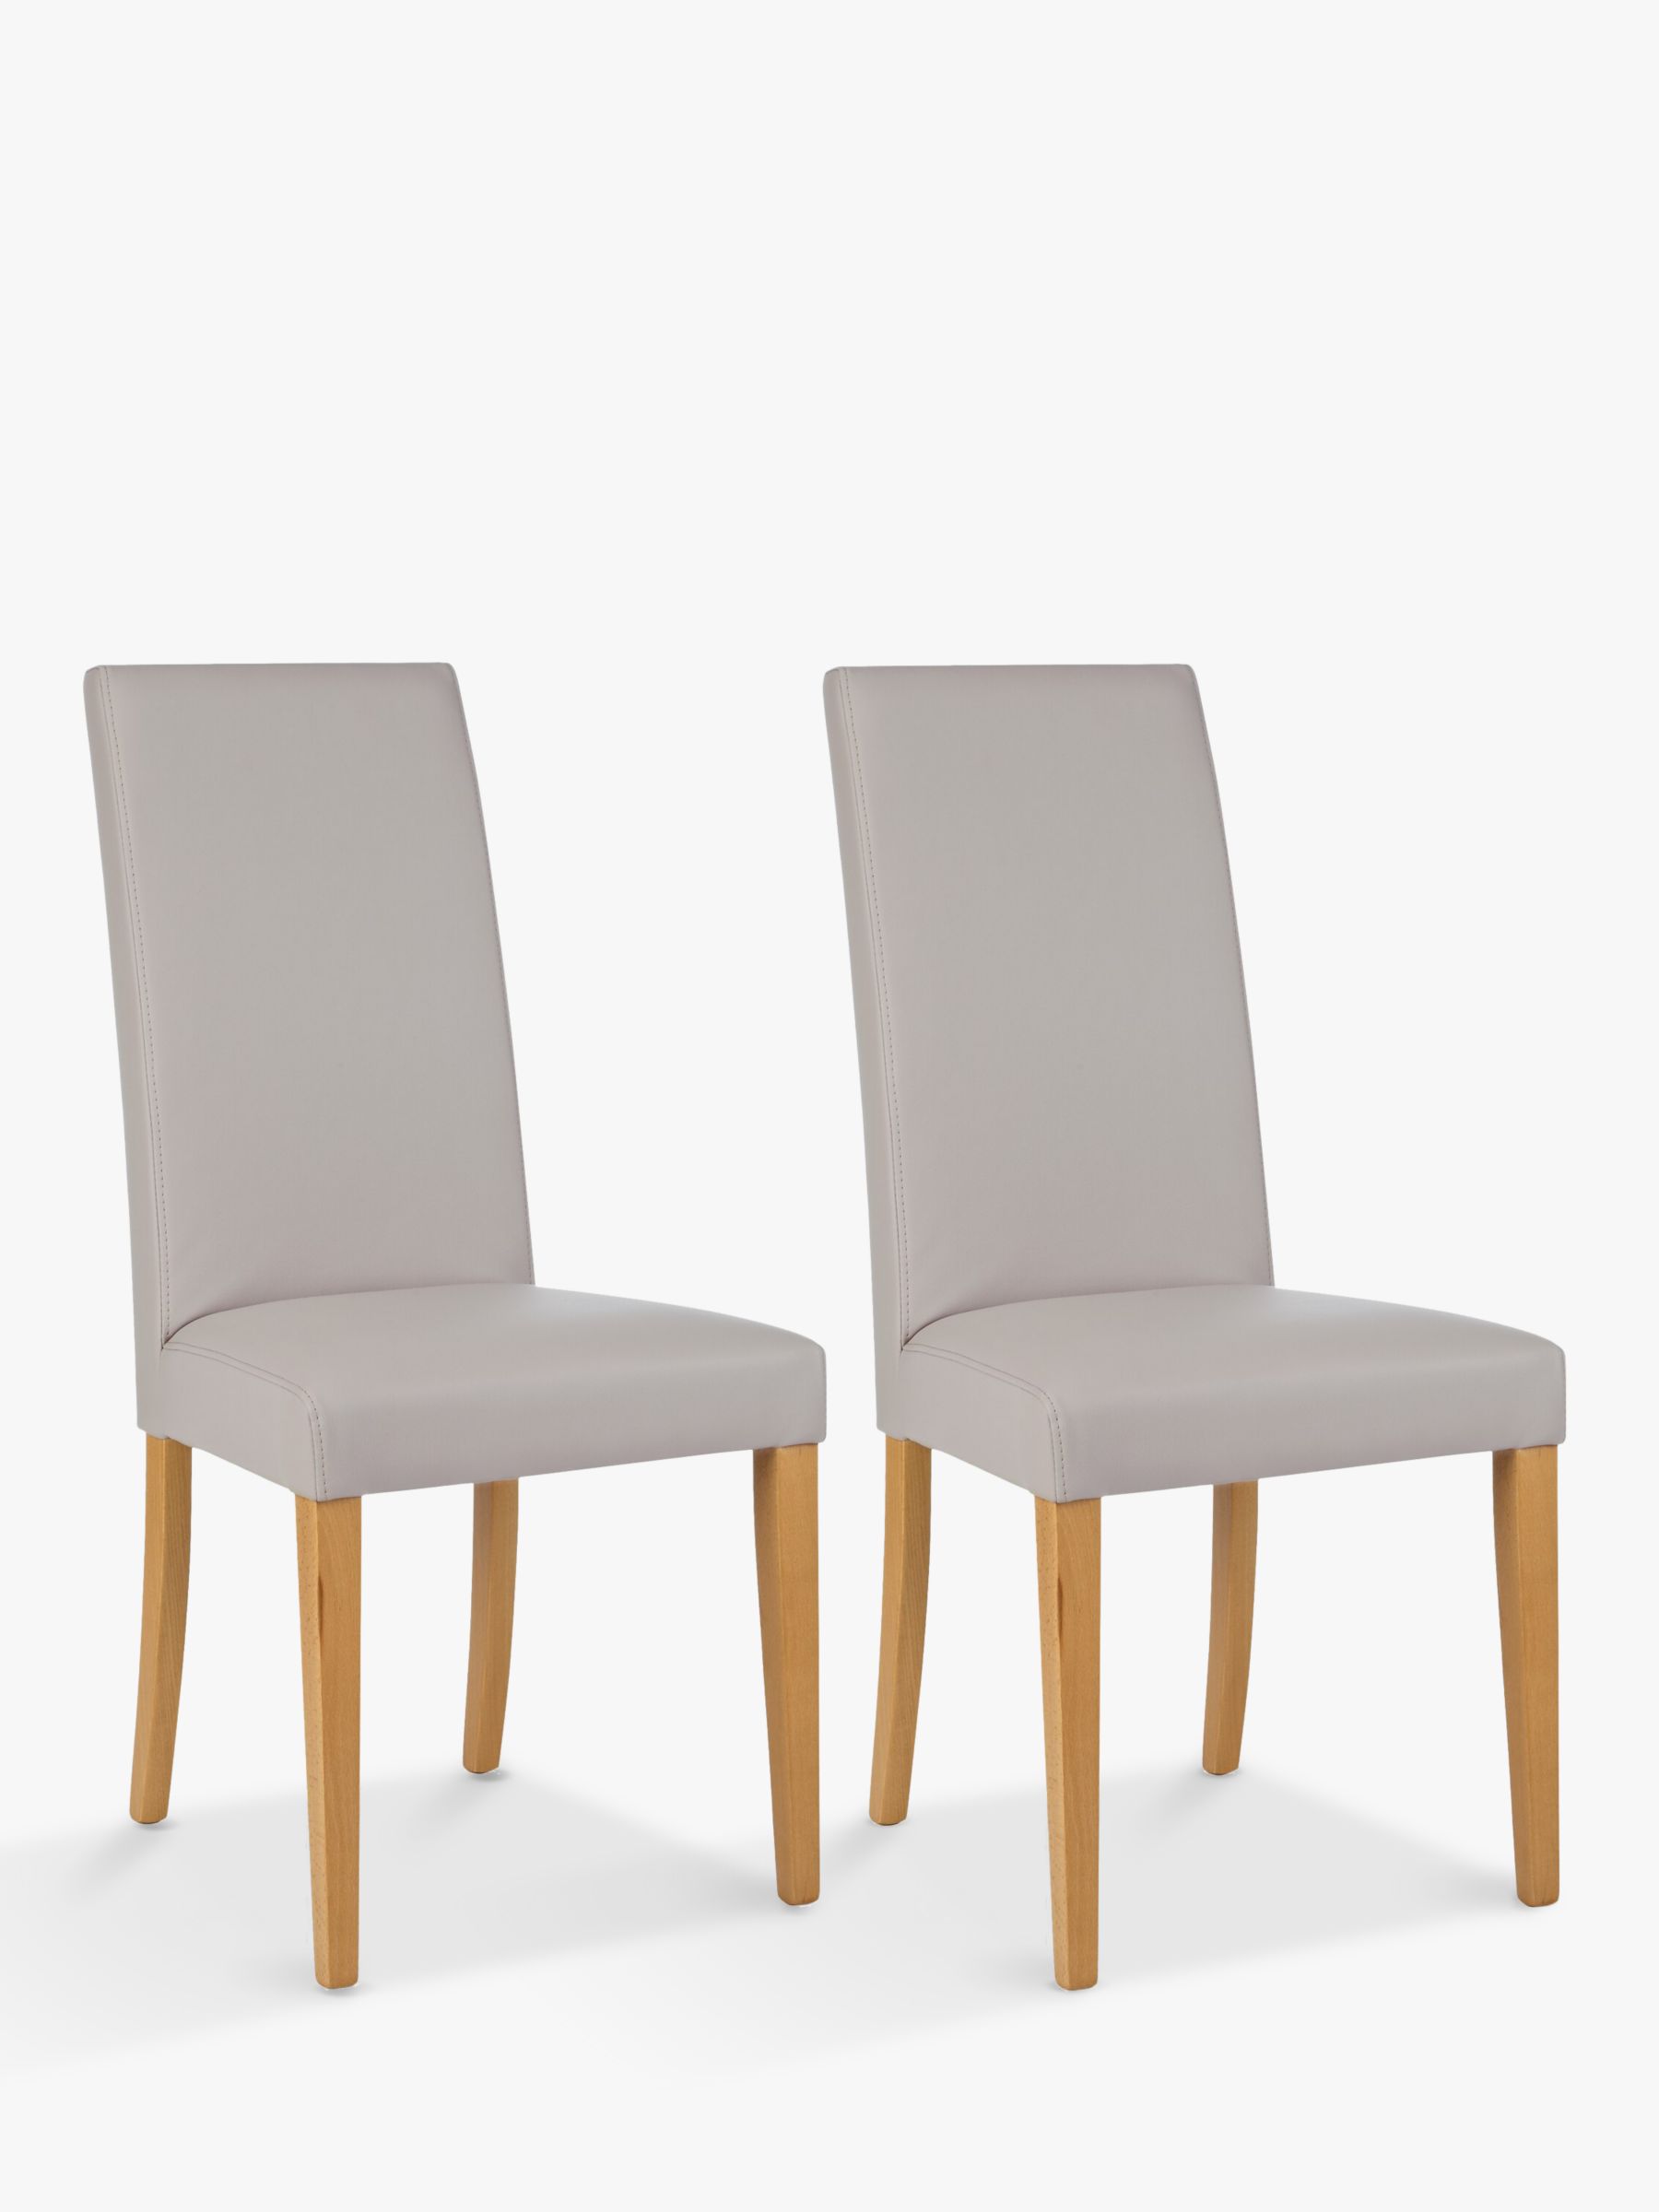 ANYDAY John Lewis & Partners Lydia Leather Effect Dining Chairs, Set of 2, FSC-Certified (Beech Wood)